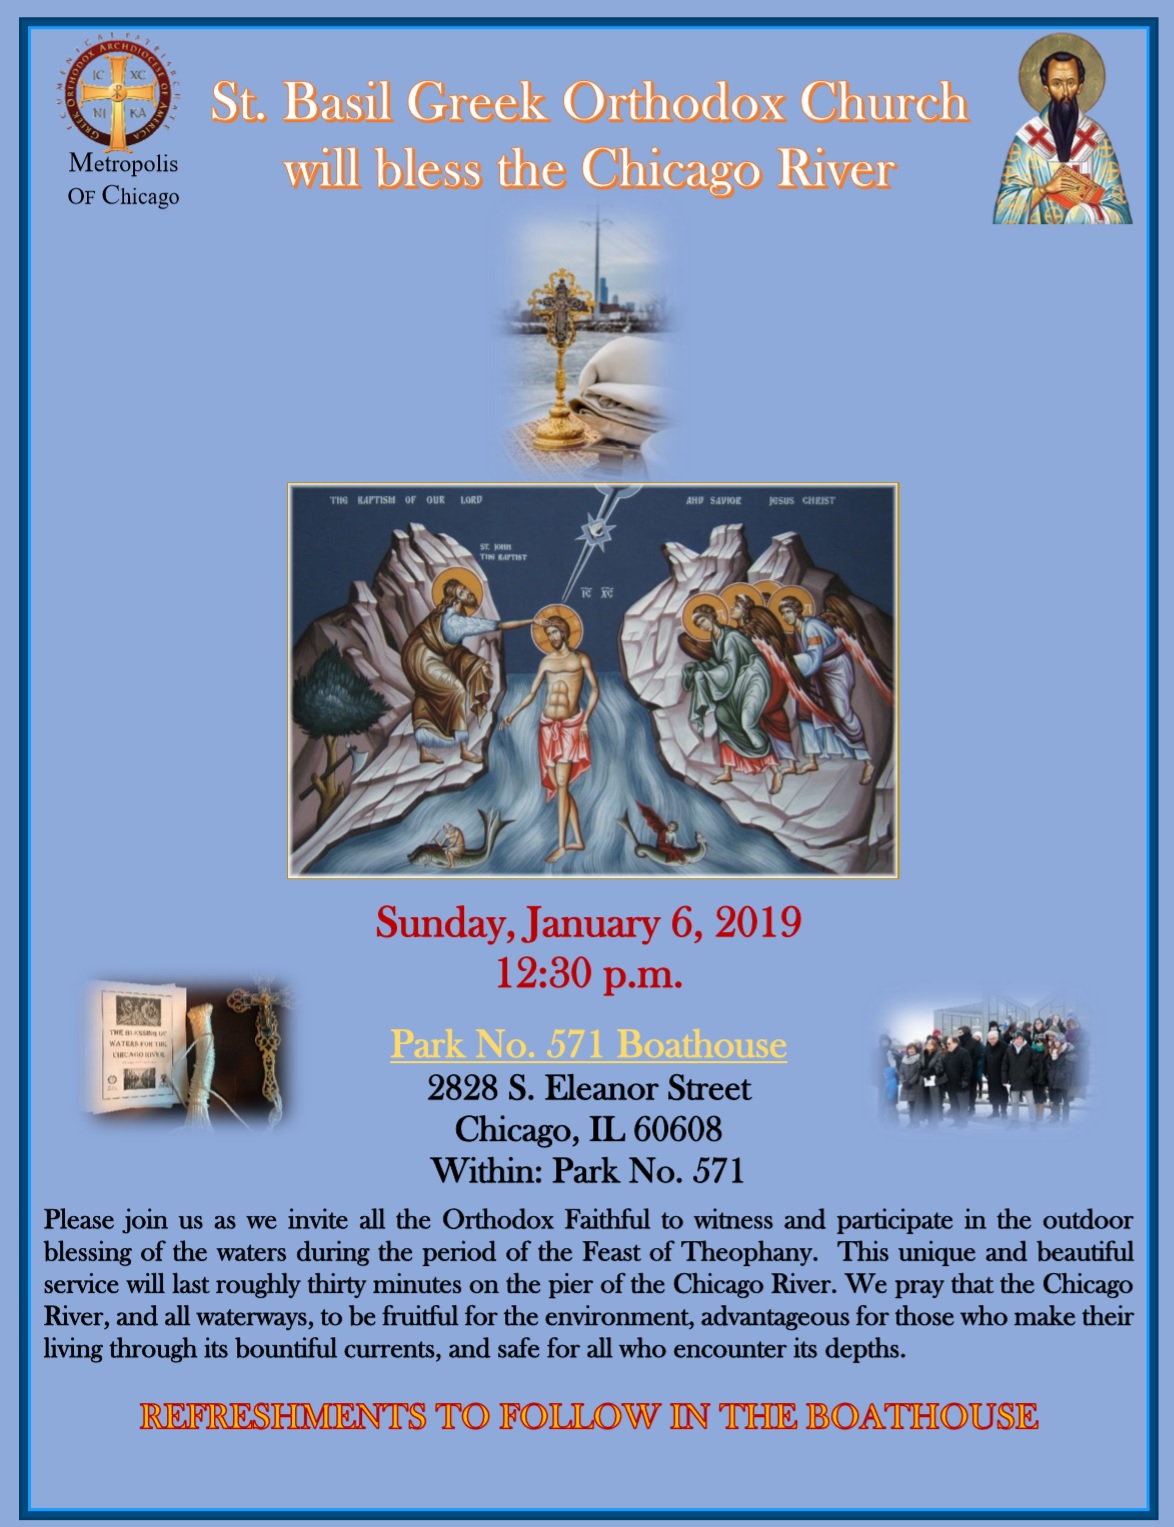 EASTERN ORTHODOX CHRISTIAN CHURCH TO HOST SECOND ANNUAL BLESSING OF THE CHICAGO RIVER